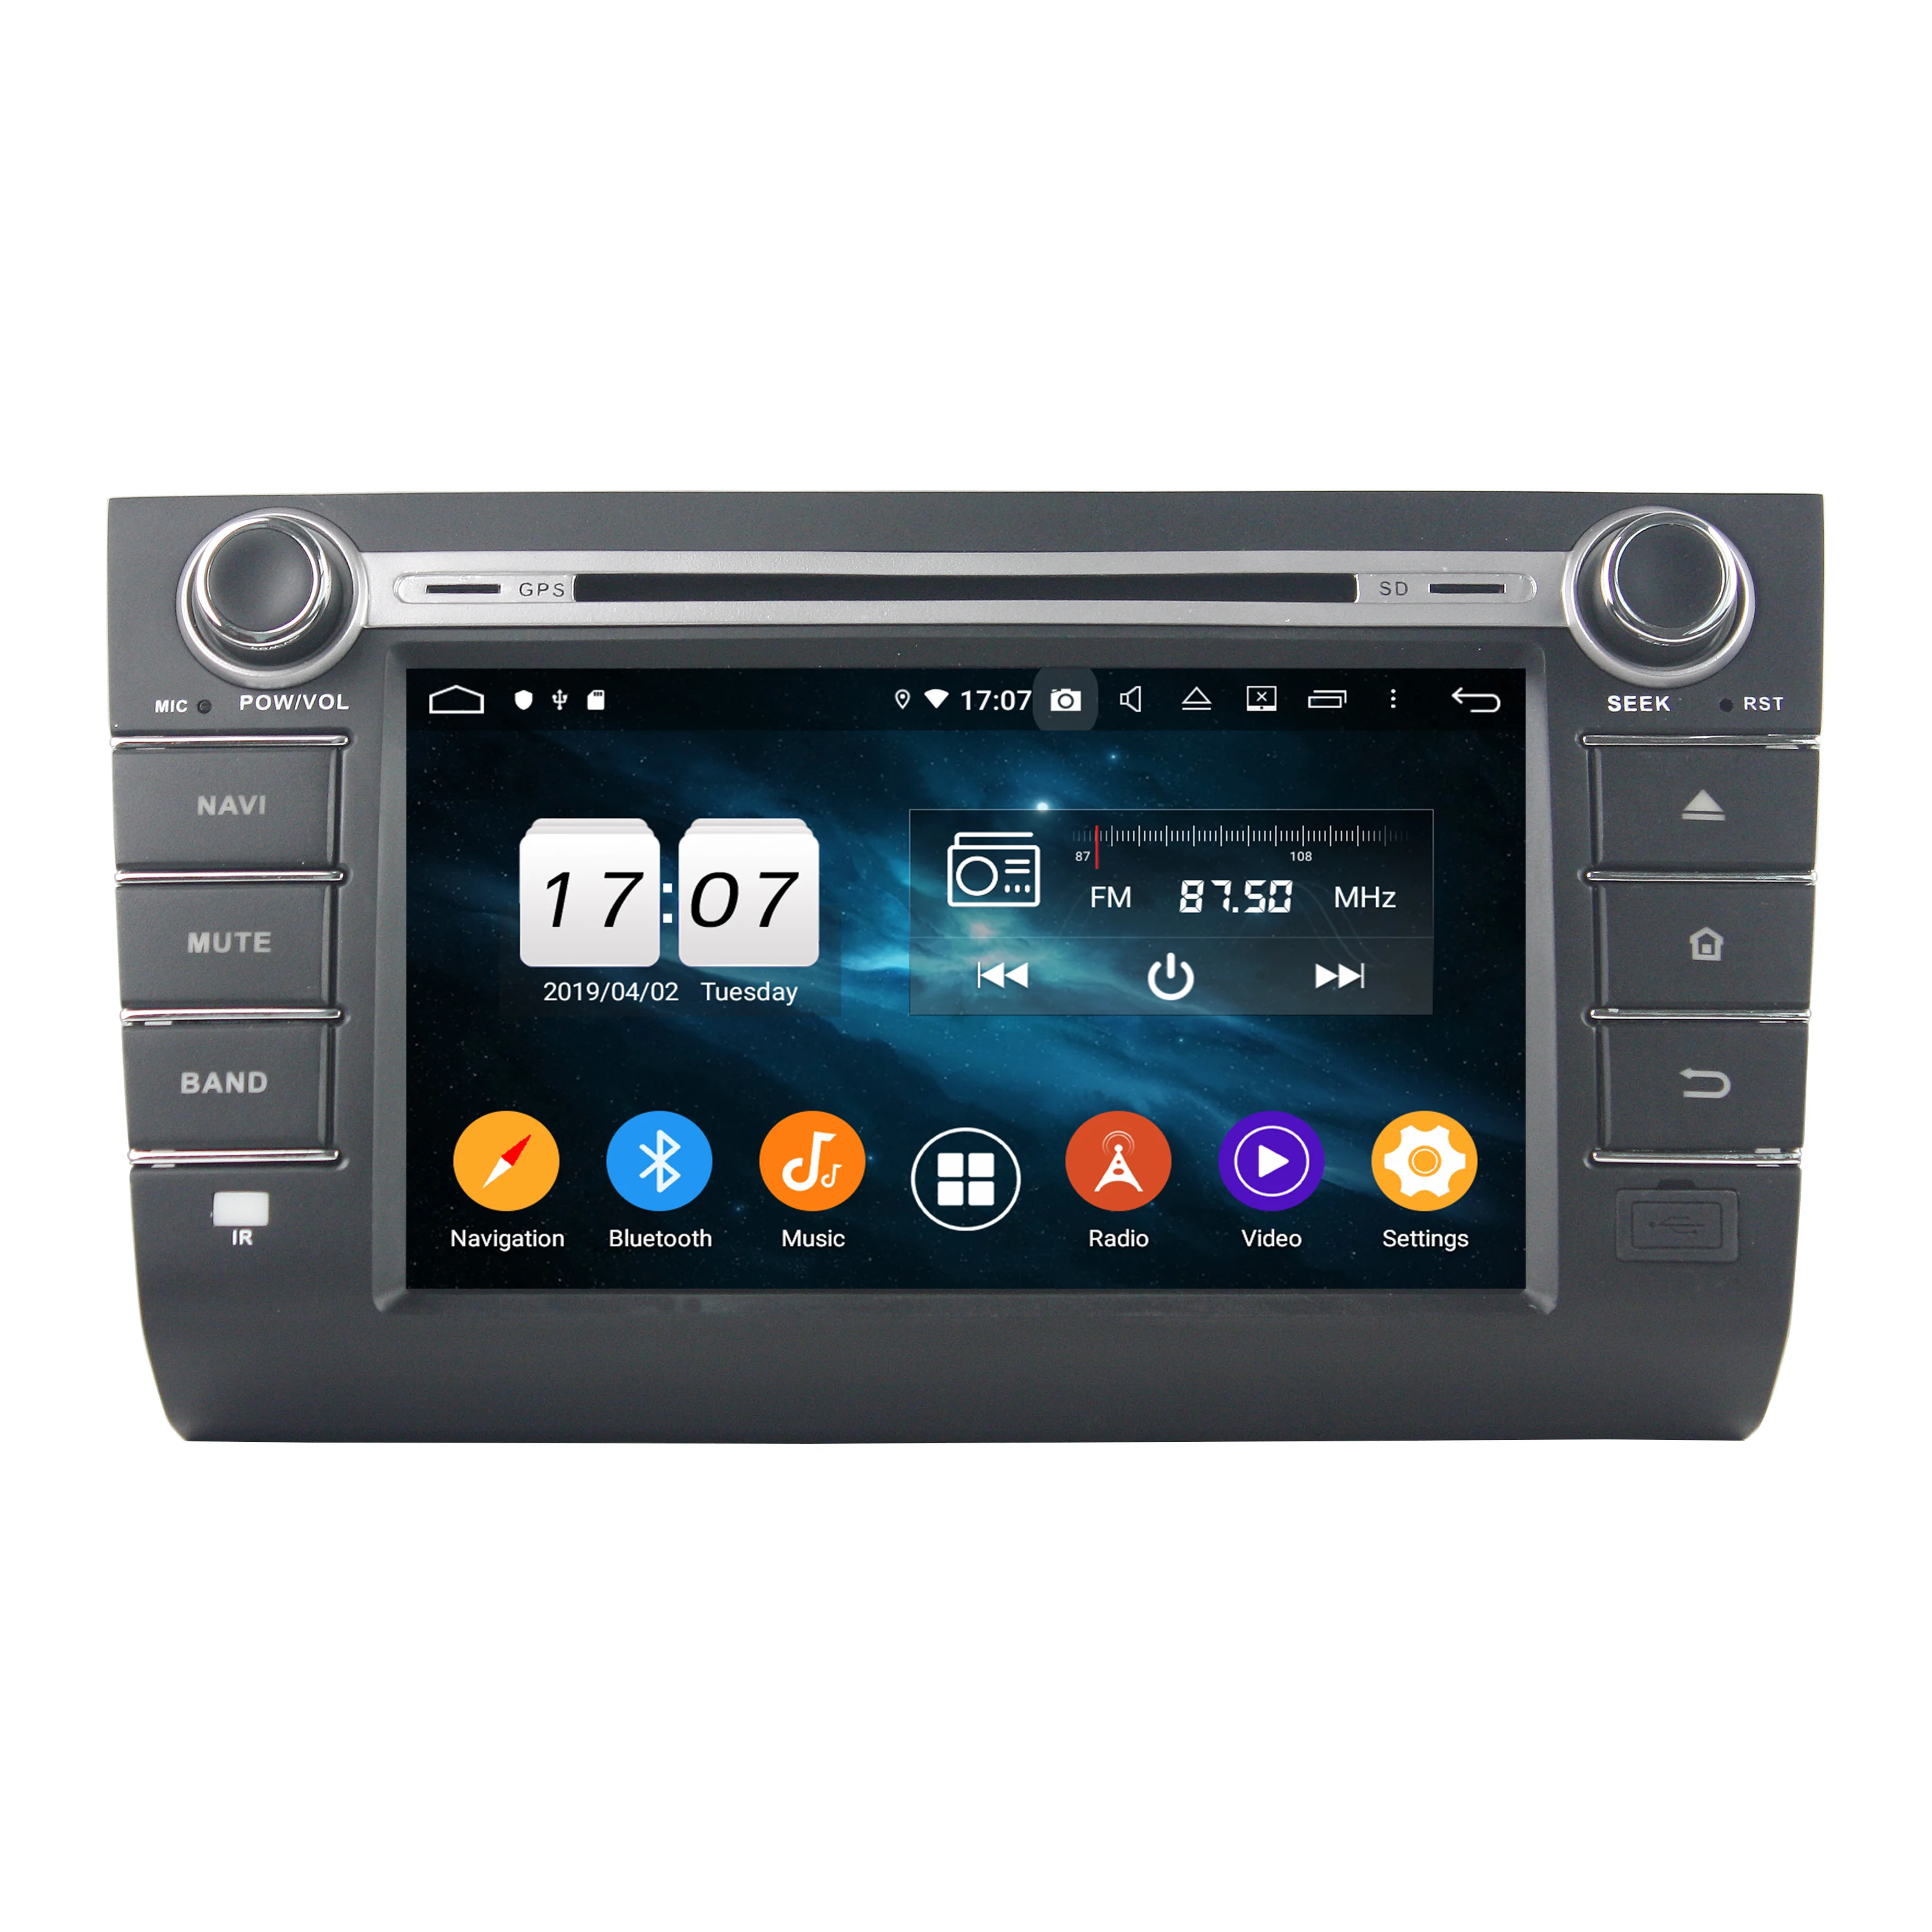 8" 2 Din 8 Core Android 9.0 Car Multimedia Player For Suzuki SWIFT 2013-2018 Car Radio 1024*600 DVD Player Car Stereo Audio DSP